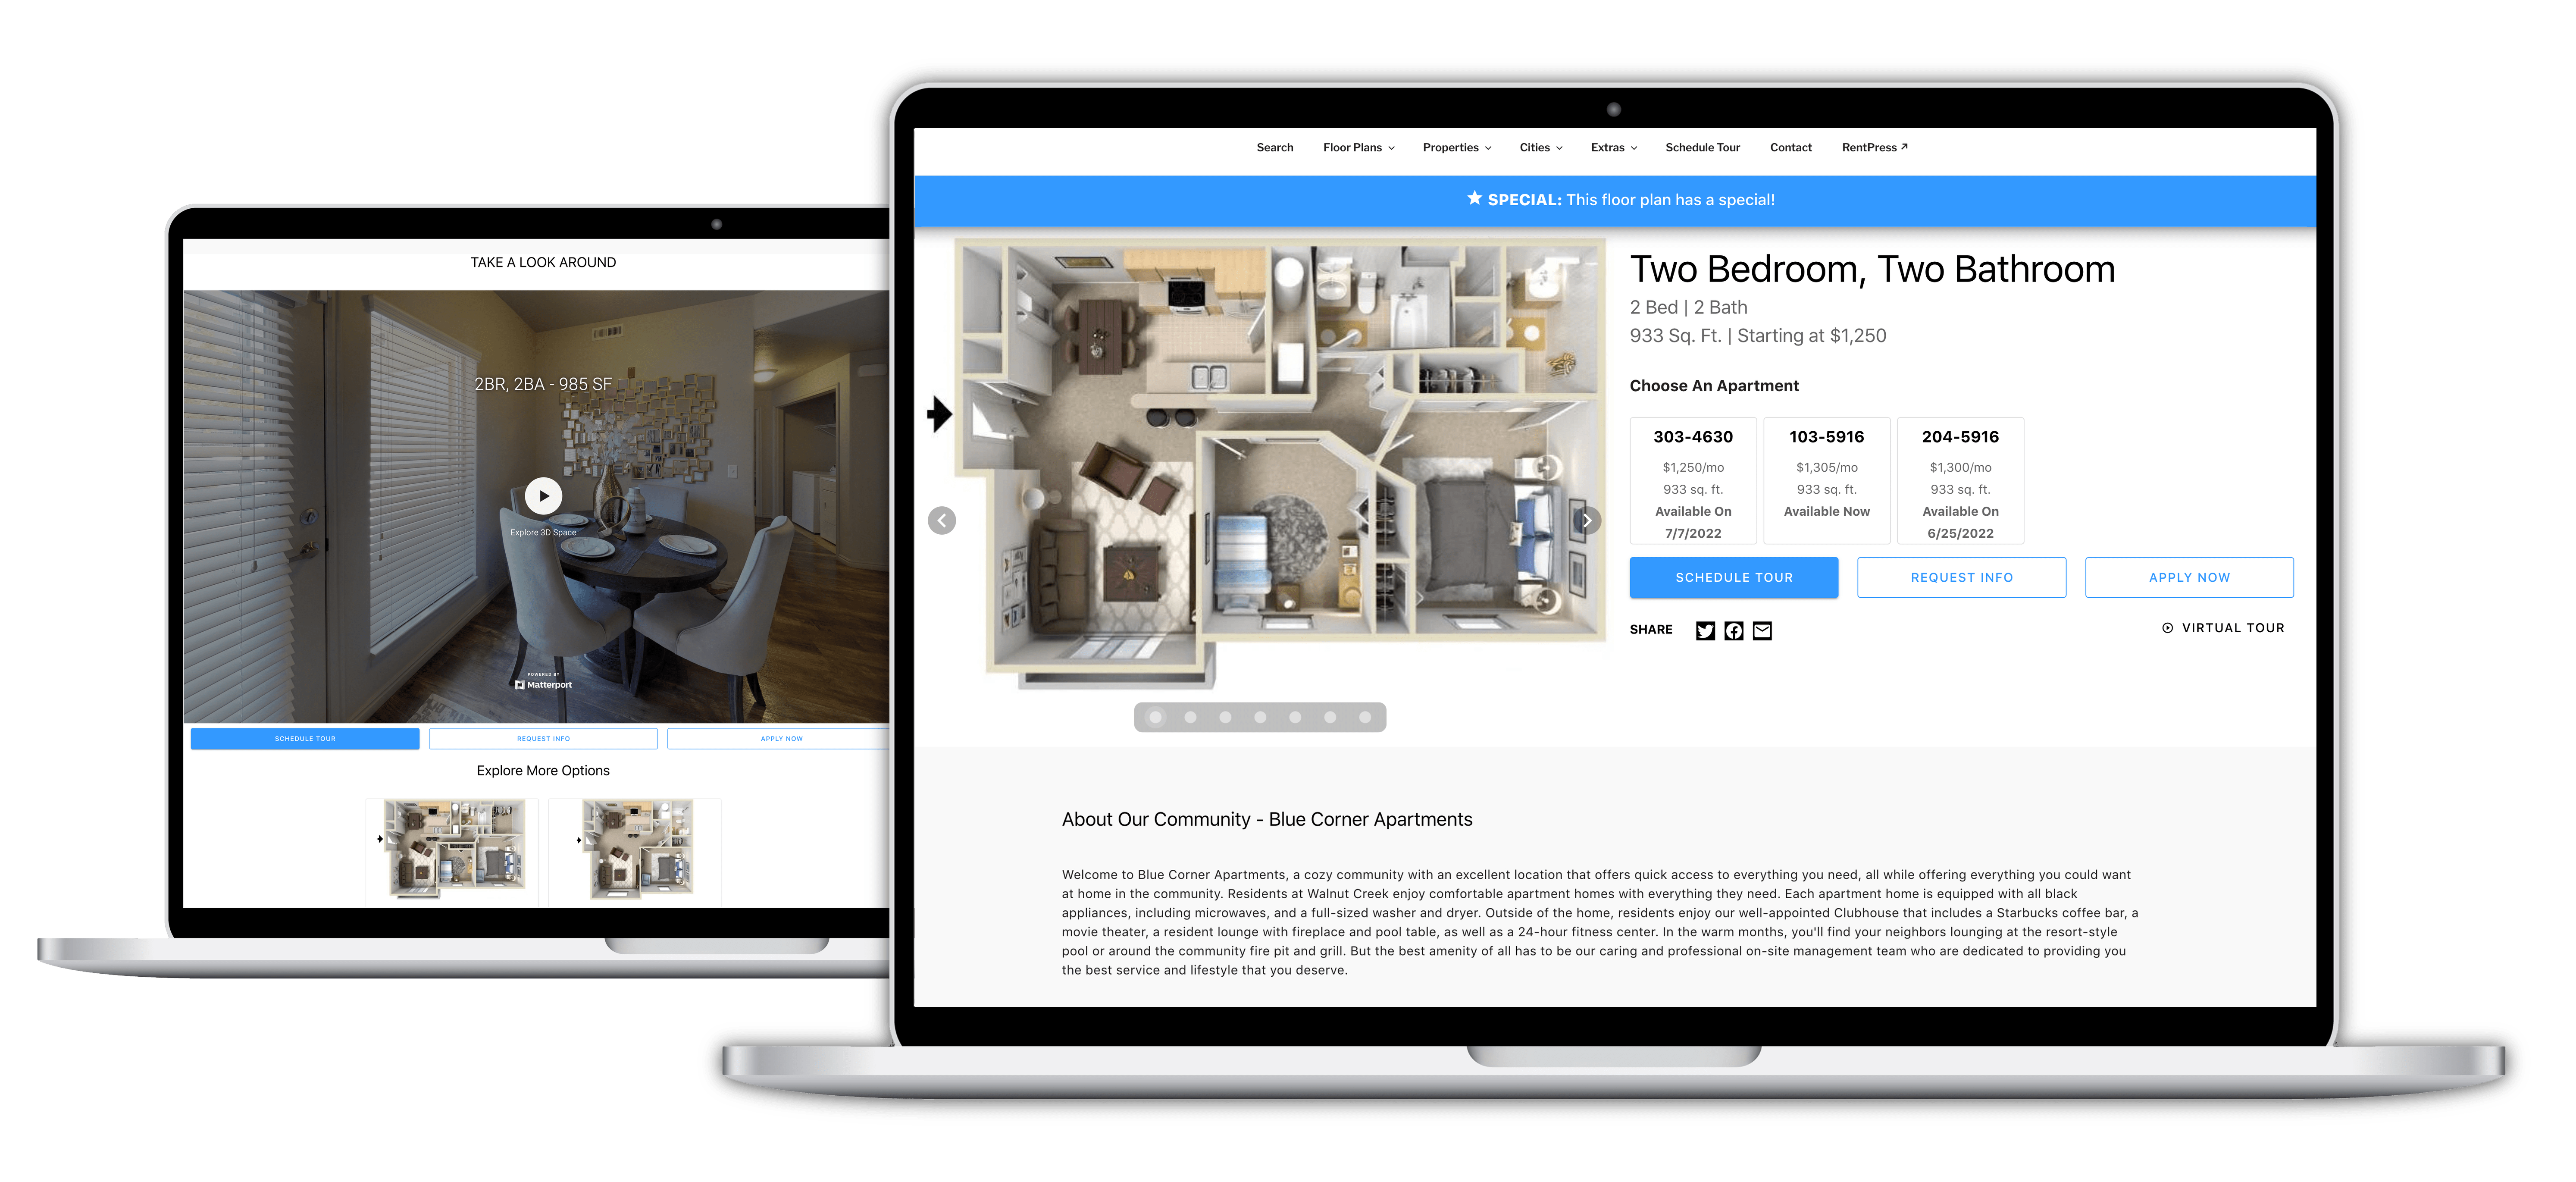 Single floor plan listing pages support virtual tours from Matterport, YouTube, Vimeo, and more.